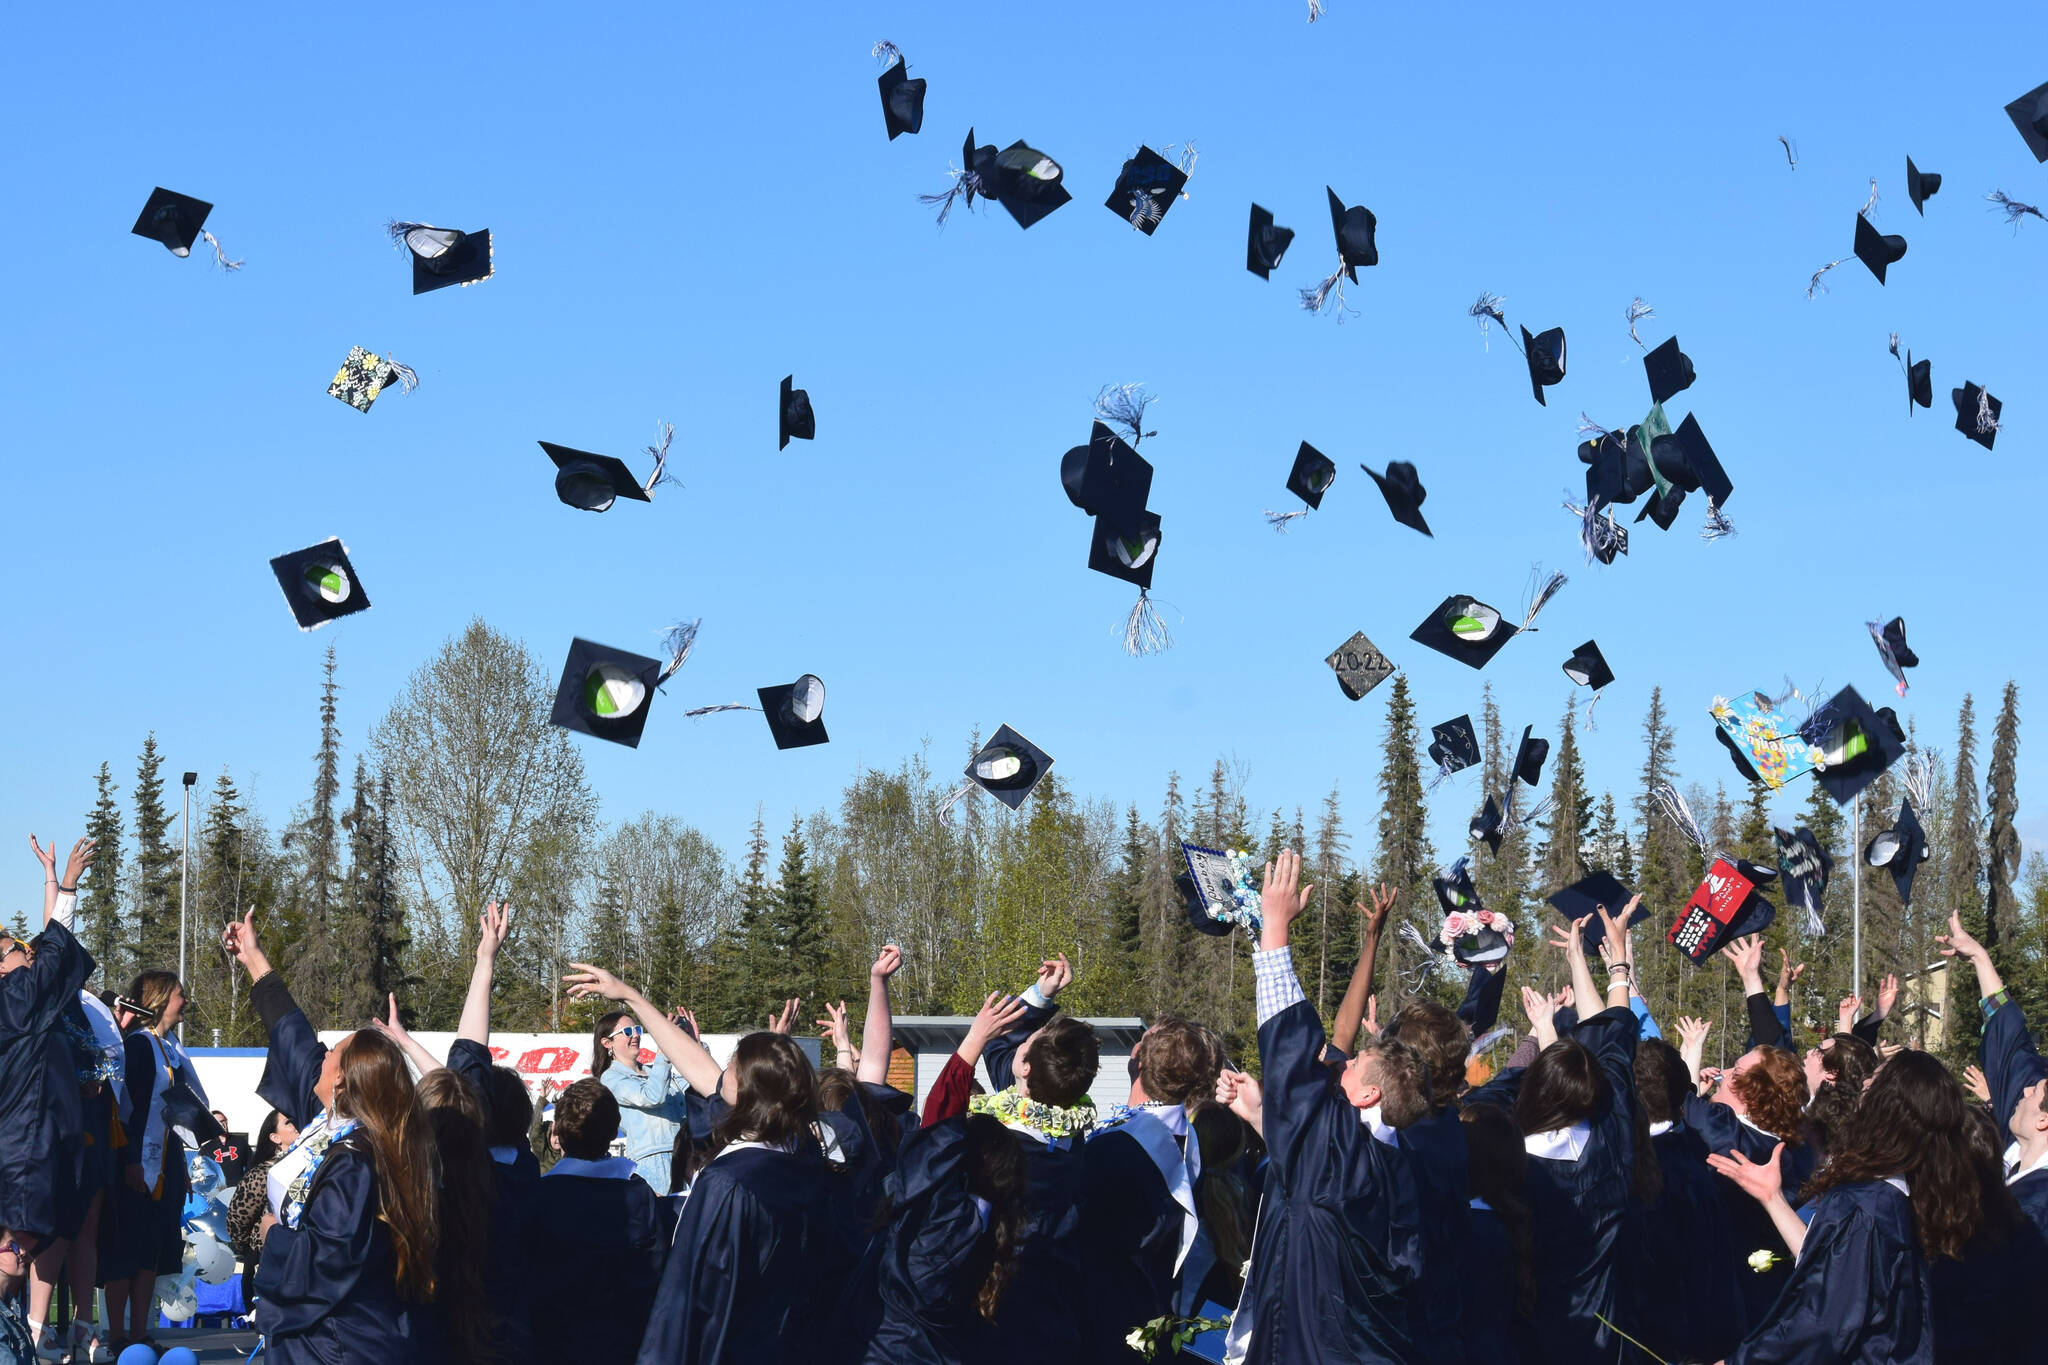 Graduates throw their caps into the air at the end of Soldotna High School’s commencement ceremony on Wednesday, May 18, 2022, in Soldotna, Alaska. (Ashlyn O’Hara/Peninsula Clarion)